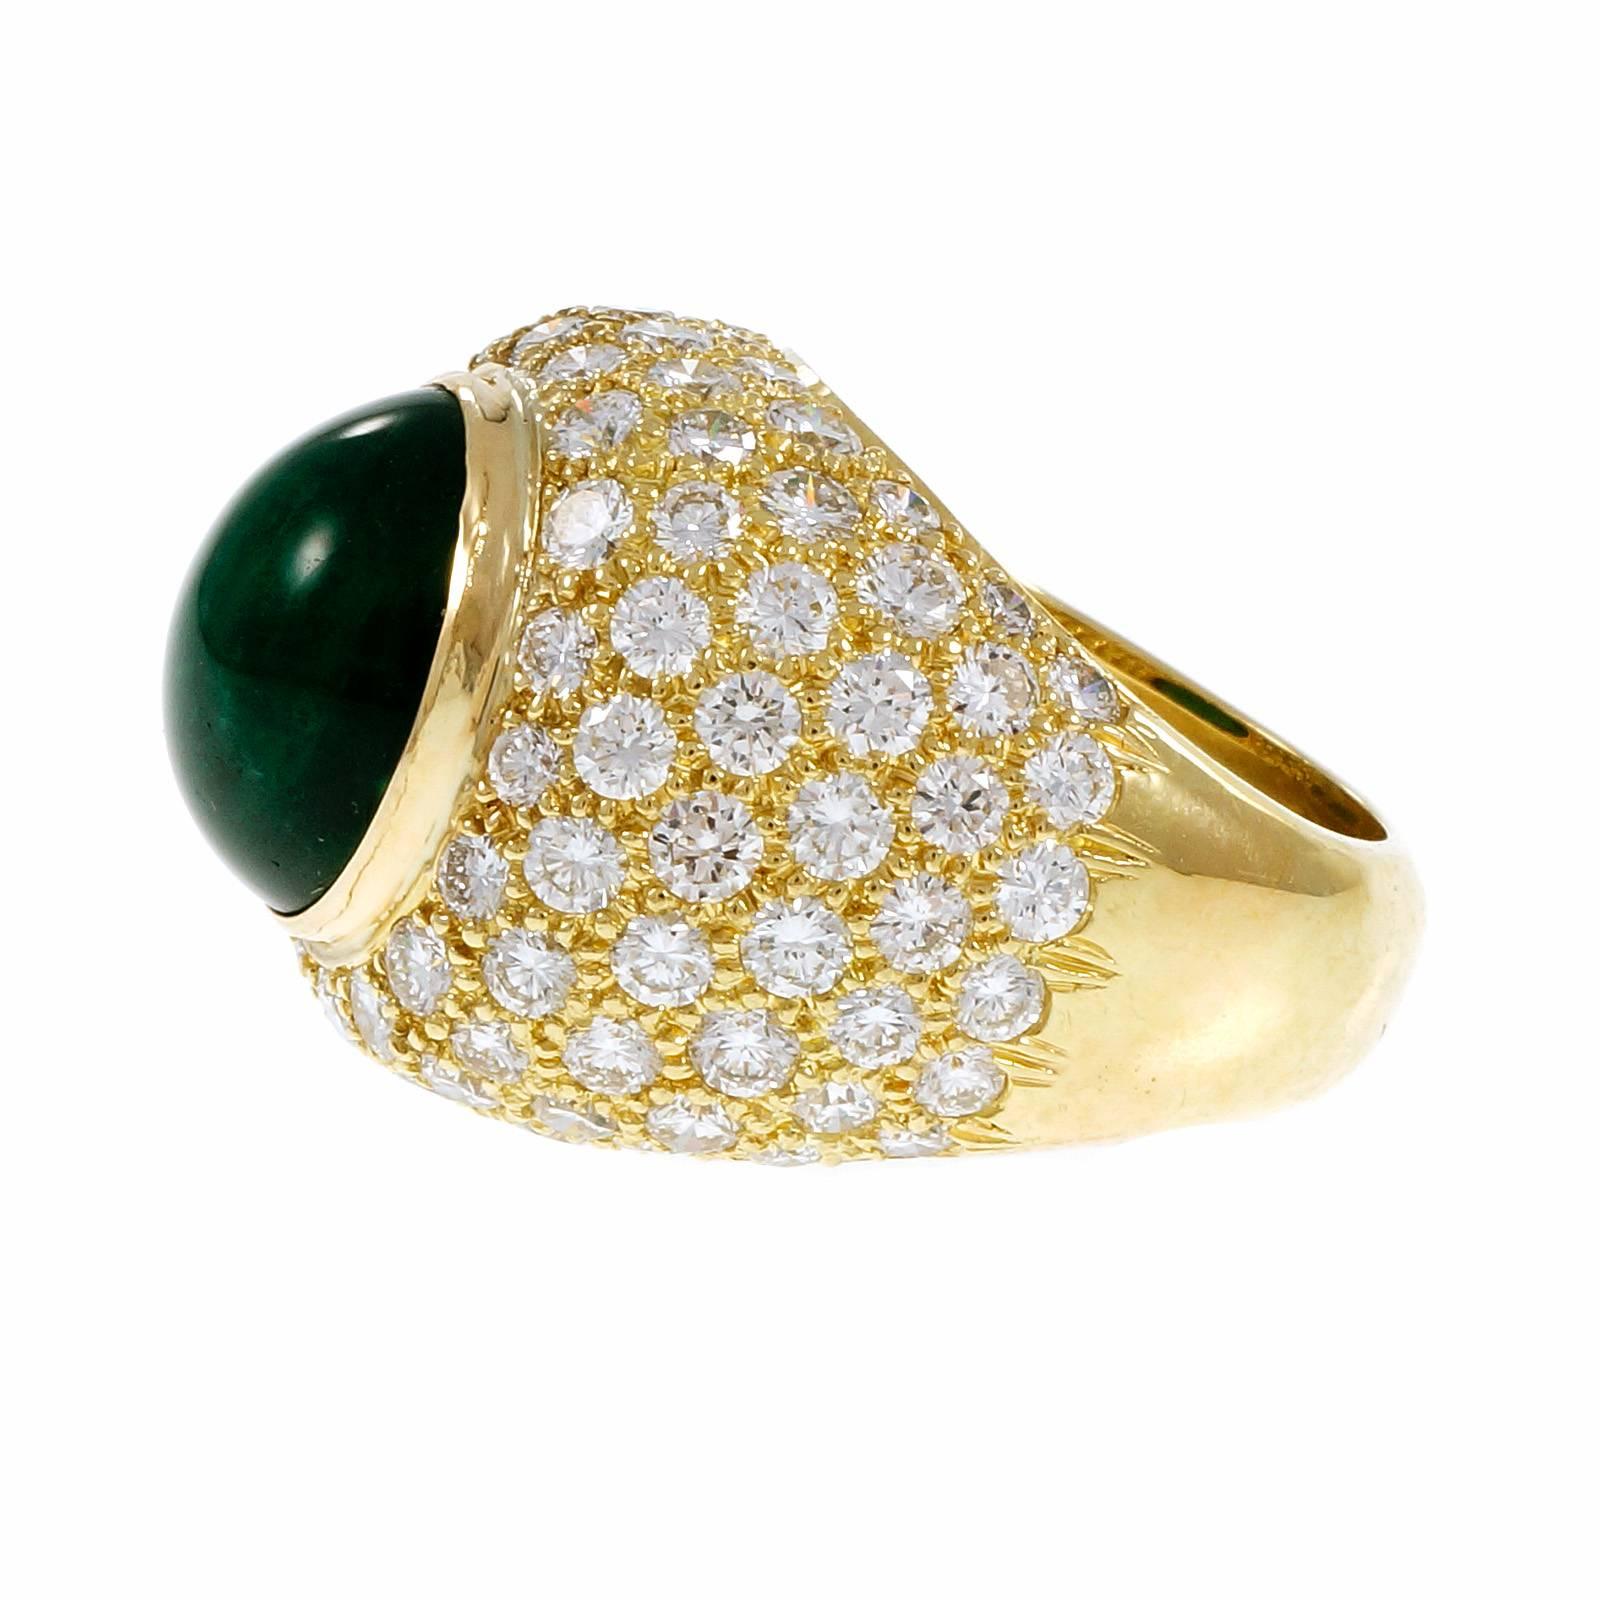 Round Cut GIA Certified 9.11 Carat Green Cabochon Emerald Diamond Dome Gold Cocktail Ring For Sale